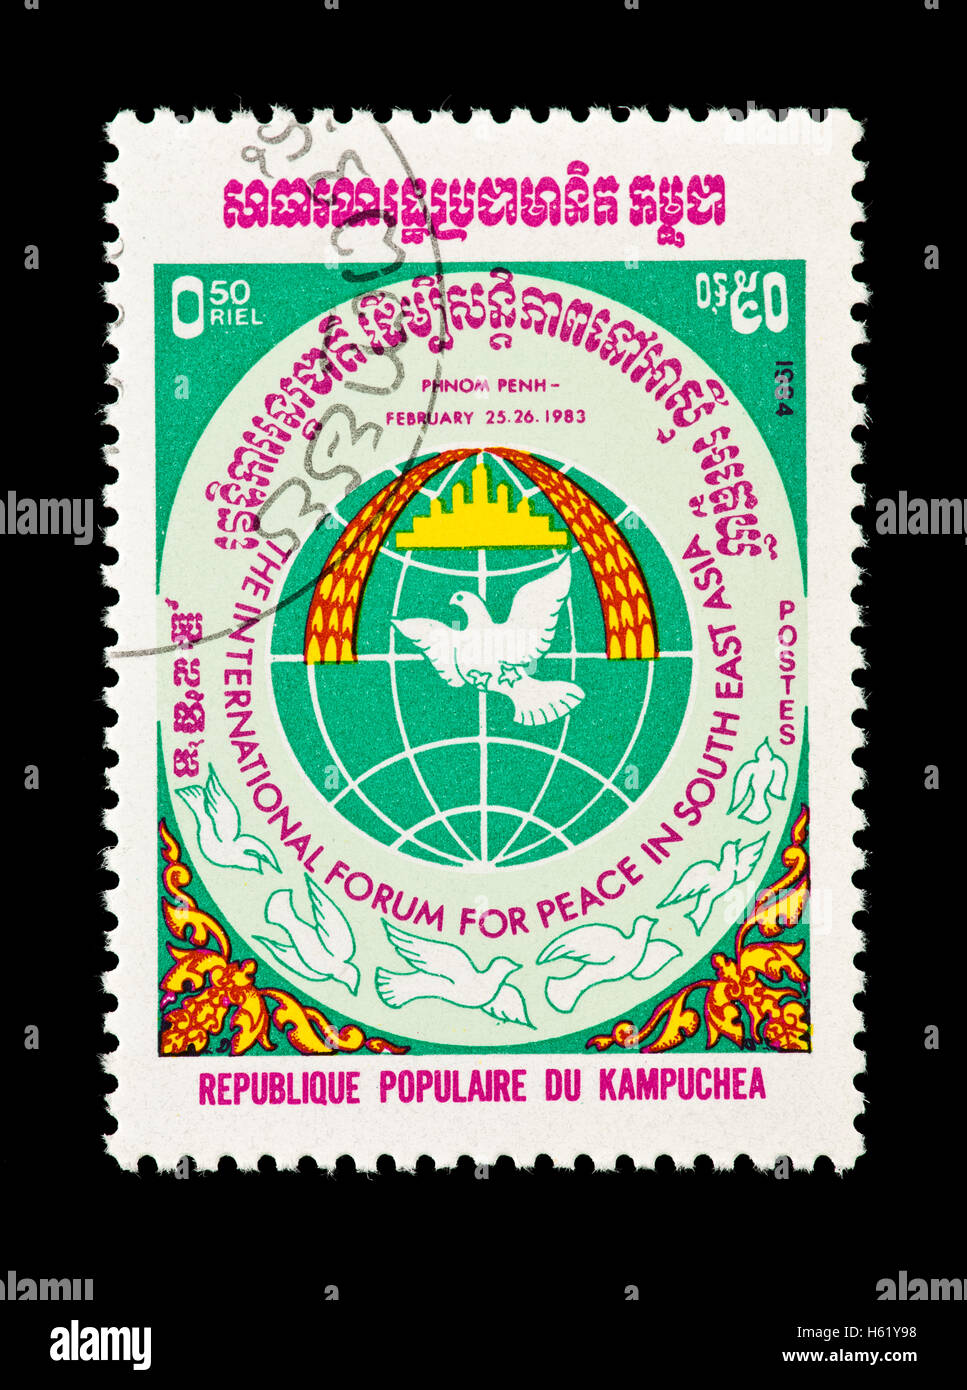 Postage stamp from Cambodia (Kampuchea) depicting symbols for an International Peace Forum in Southeast Asia. Stock Photo